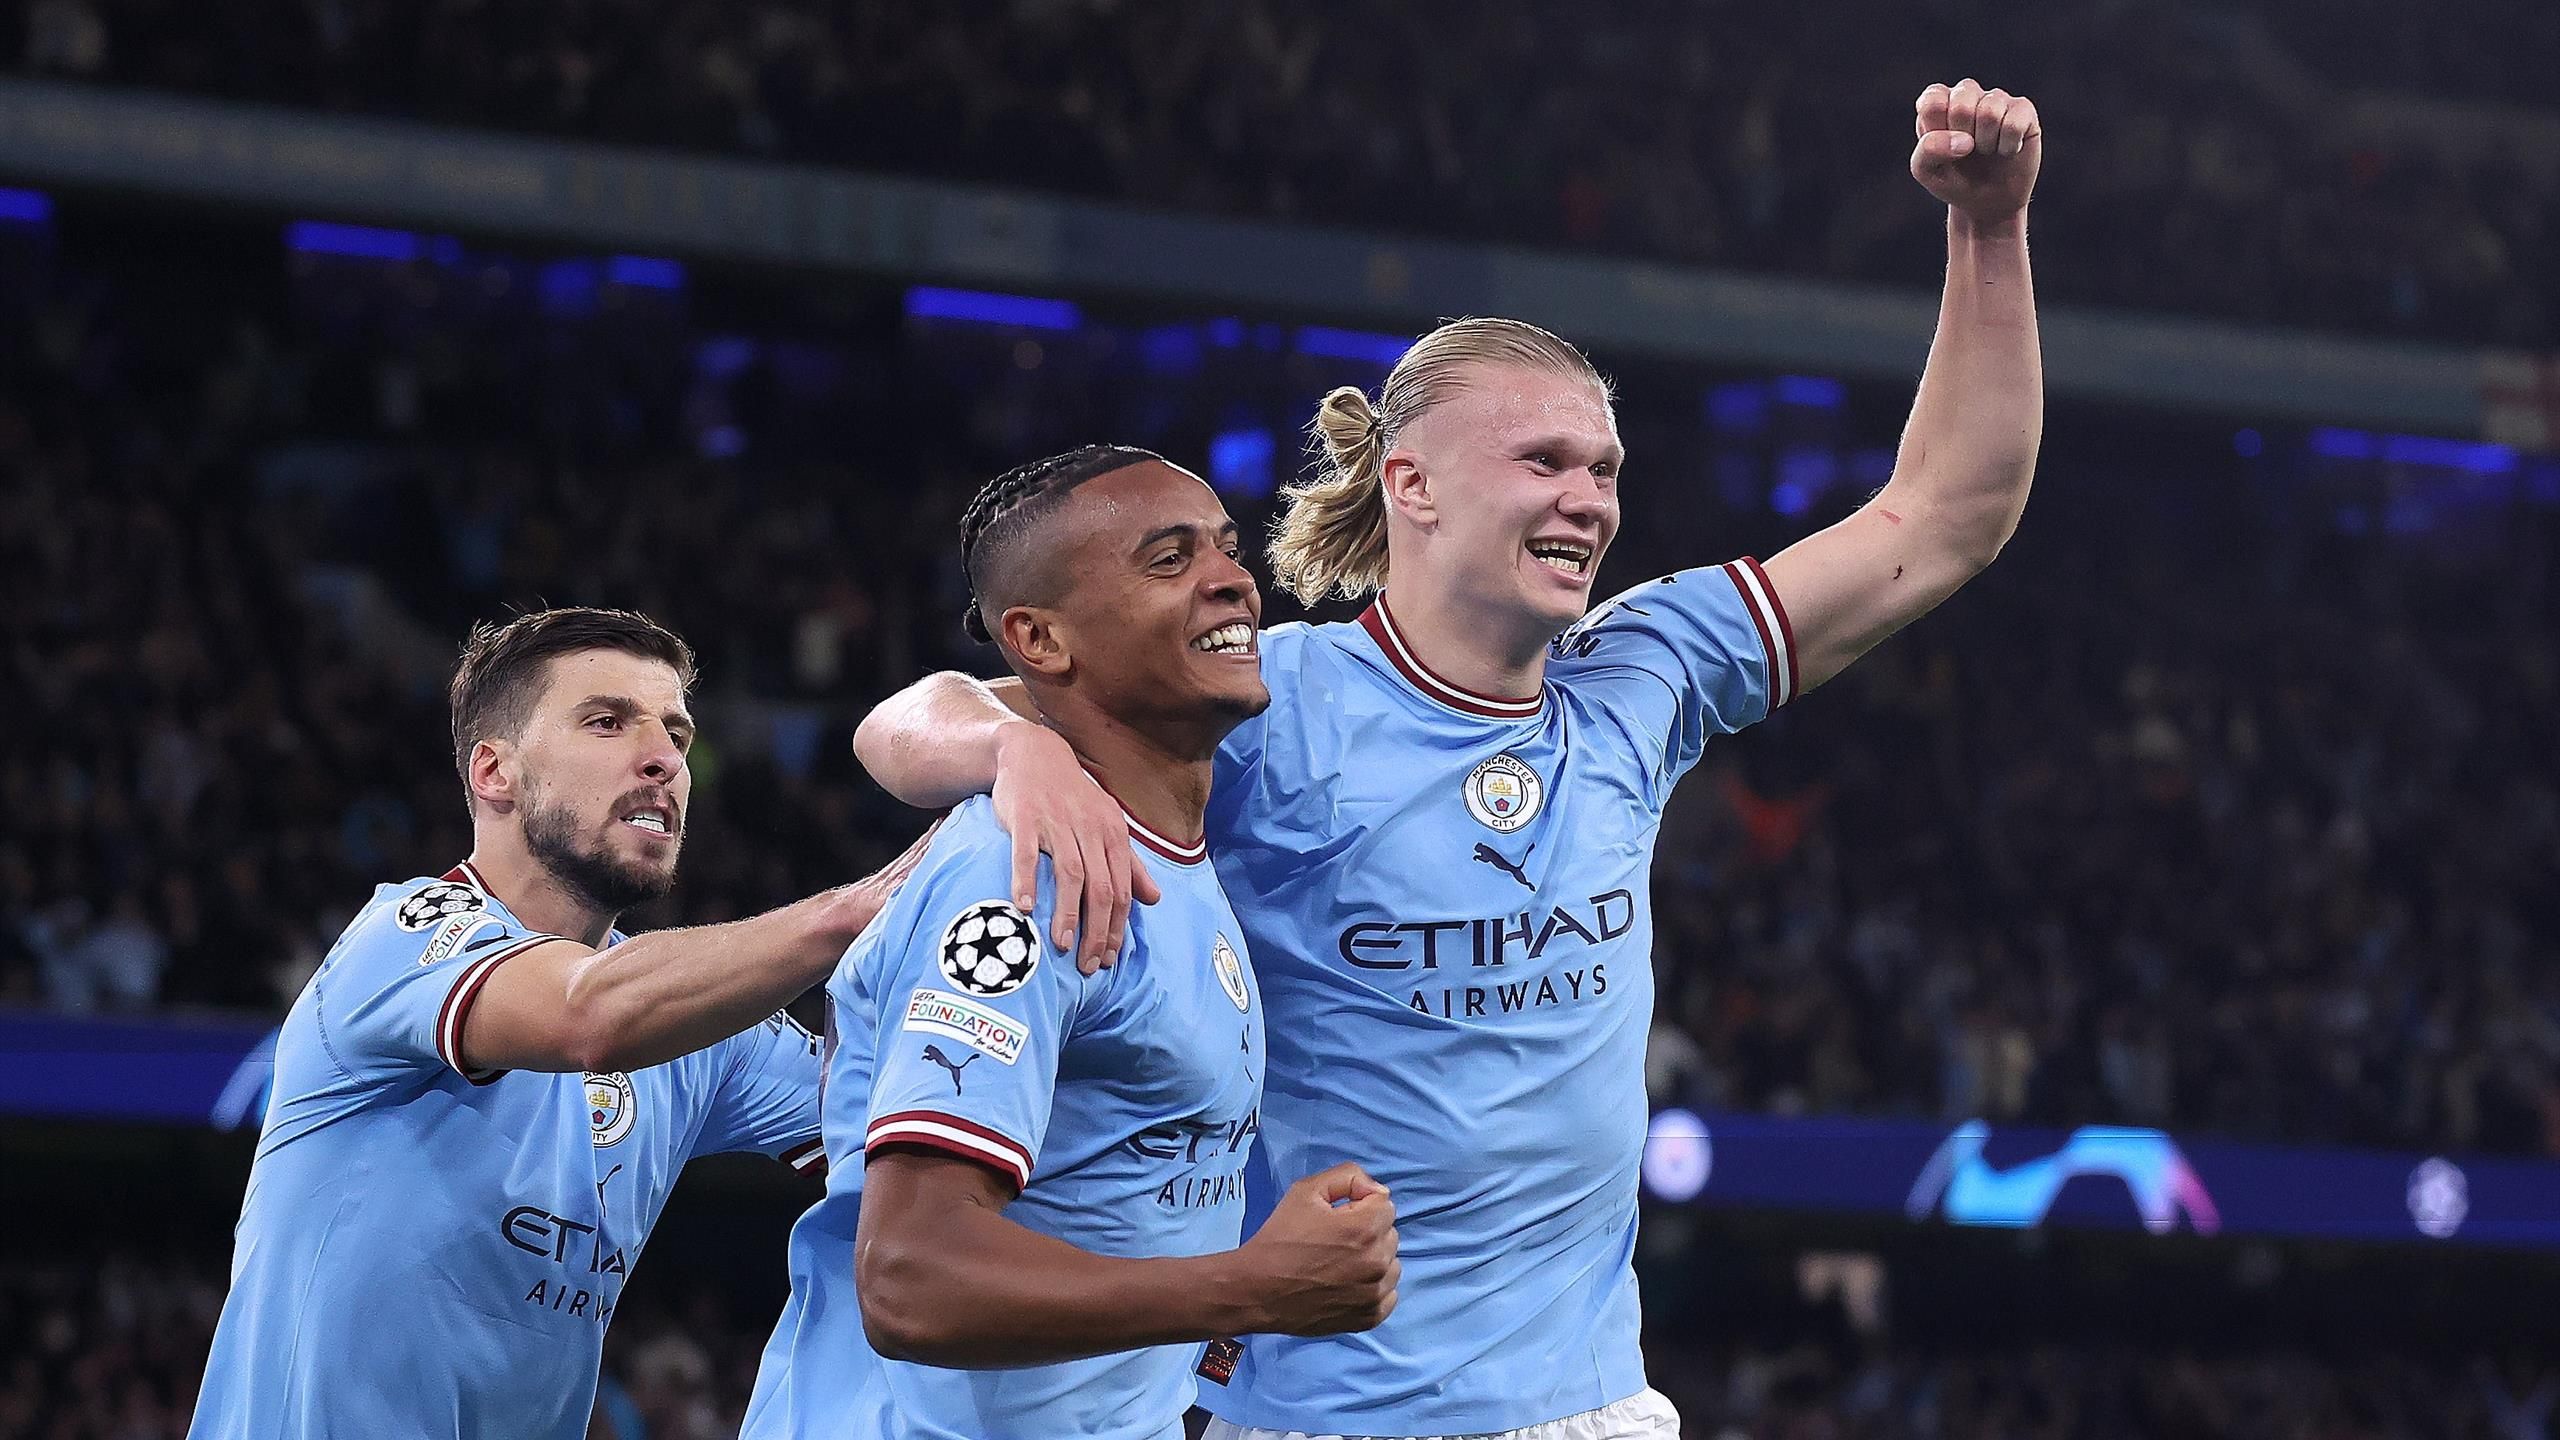 Manchester City v Inter Milan How to watch Champions League final, TV channel, live stream details, kick-off time